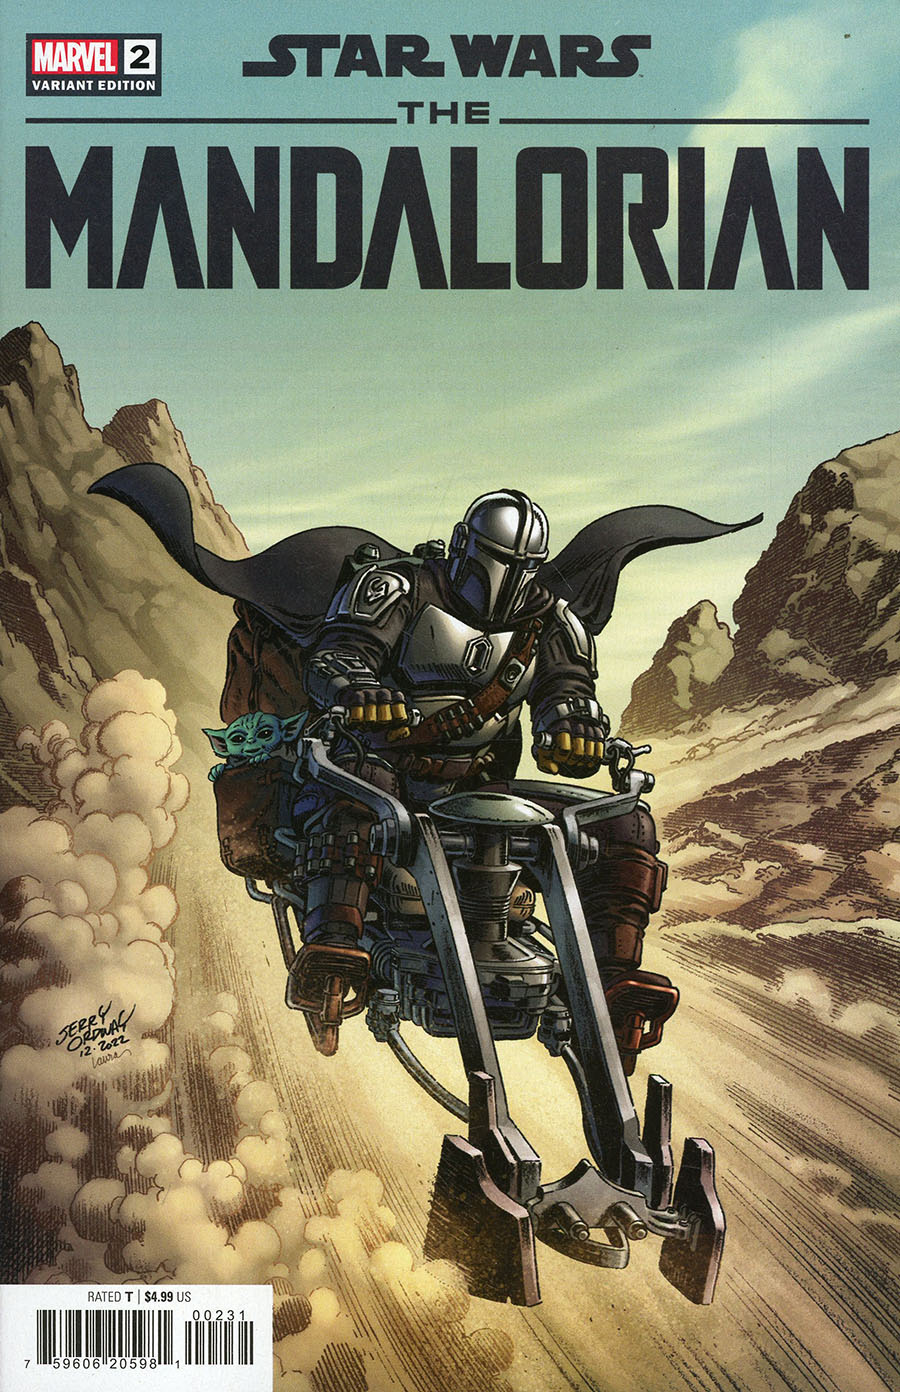 Star Wars The Mandalorian Season 2 #2 Cover B Variant Jerry Ordway Cover